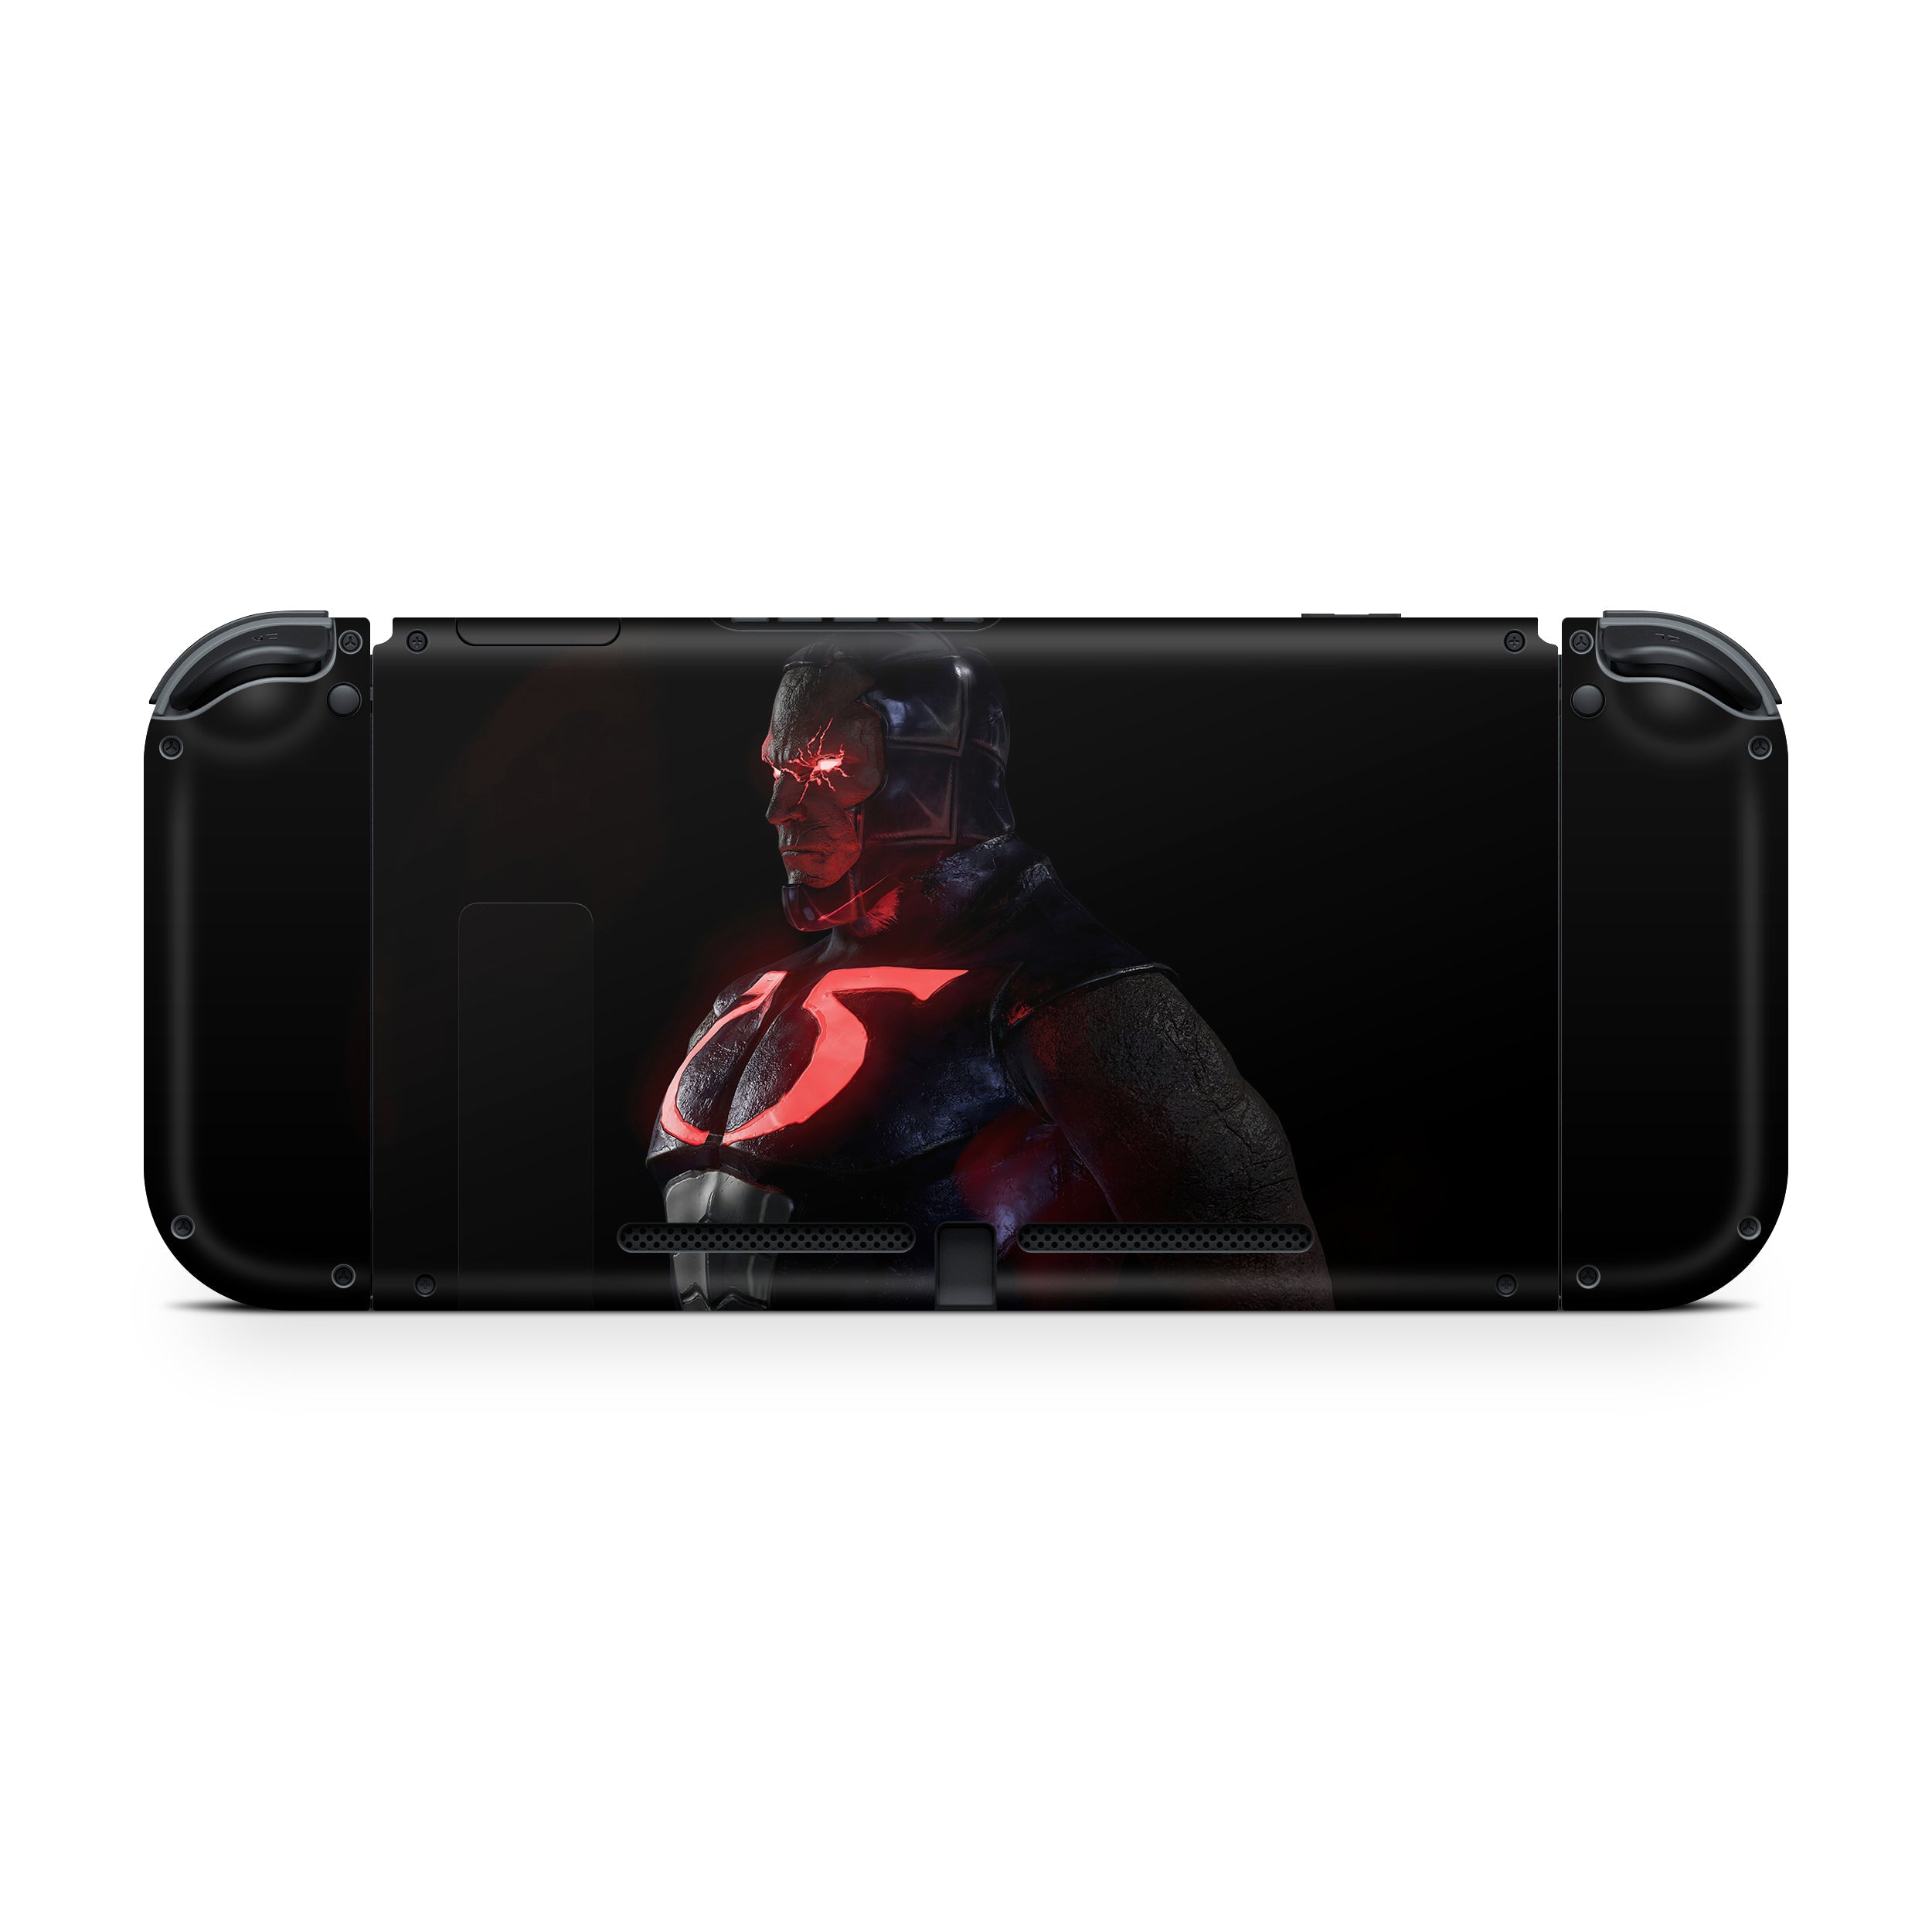 A video game skin featuring a DC Comics Darkseid design for the Nintendo Switch.